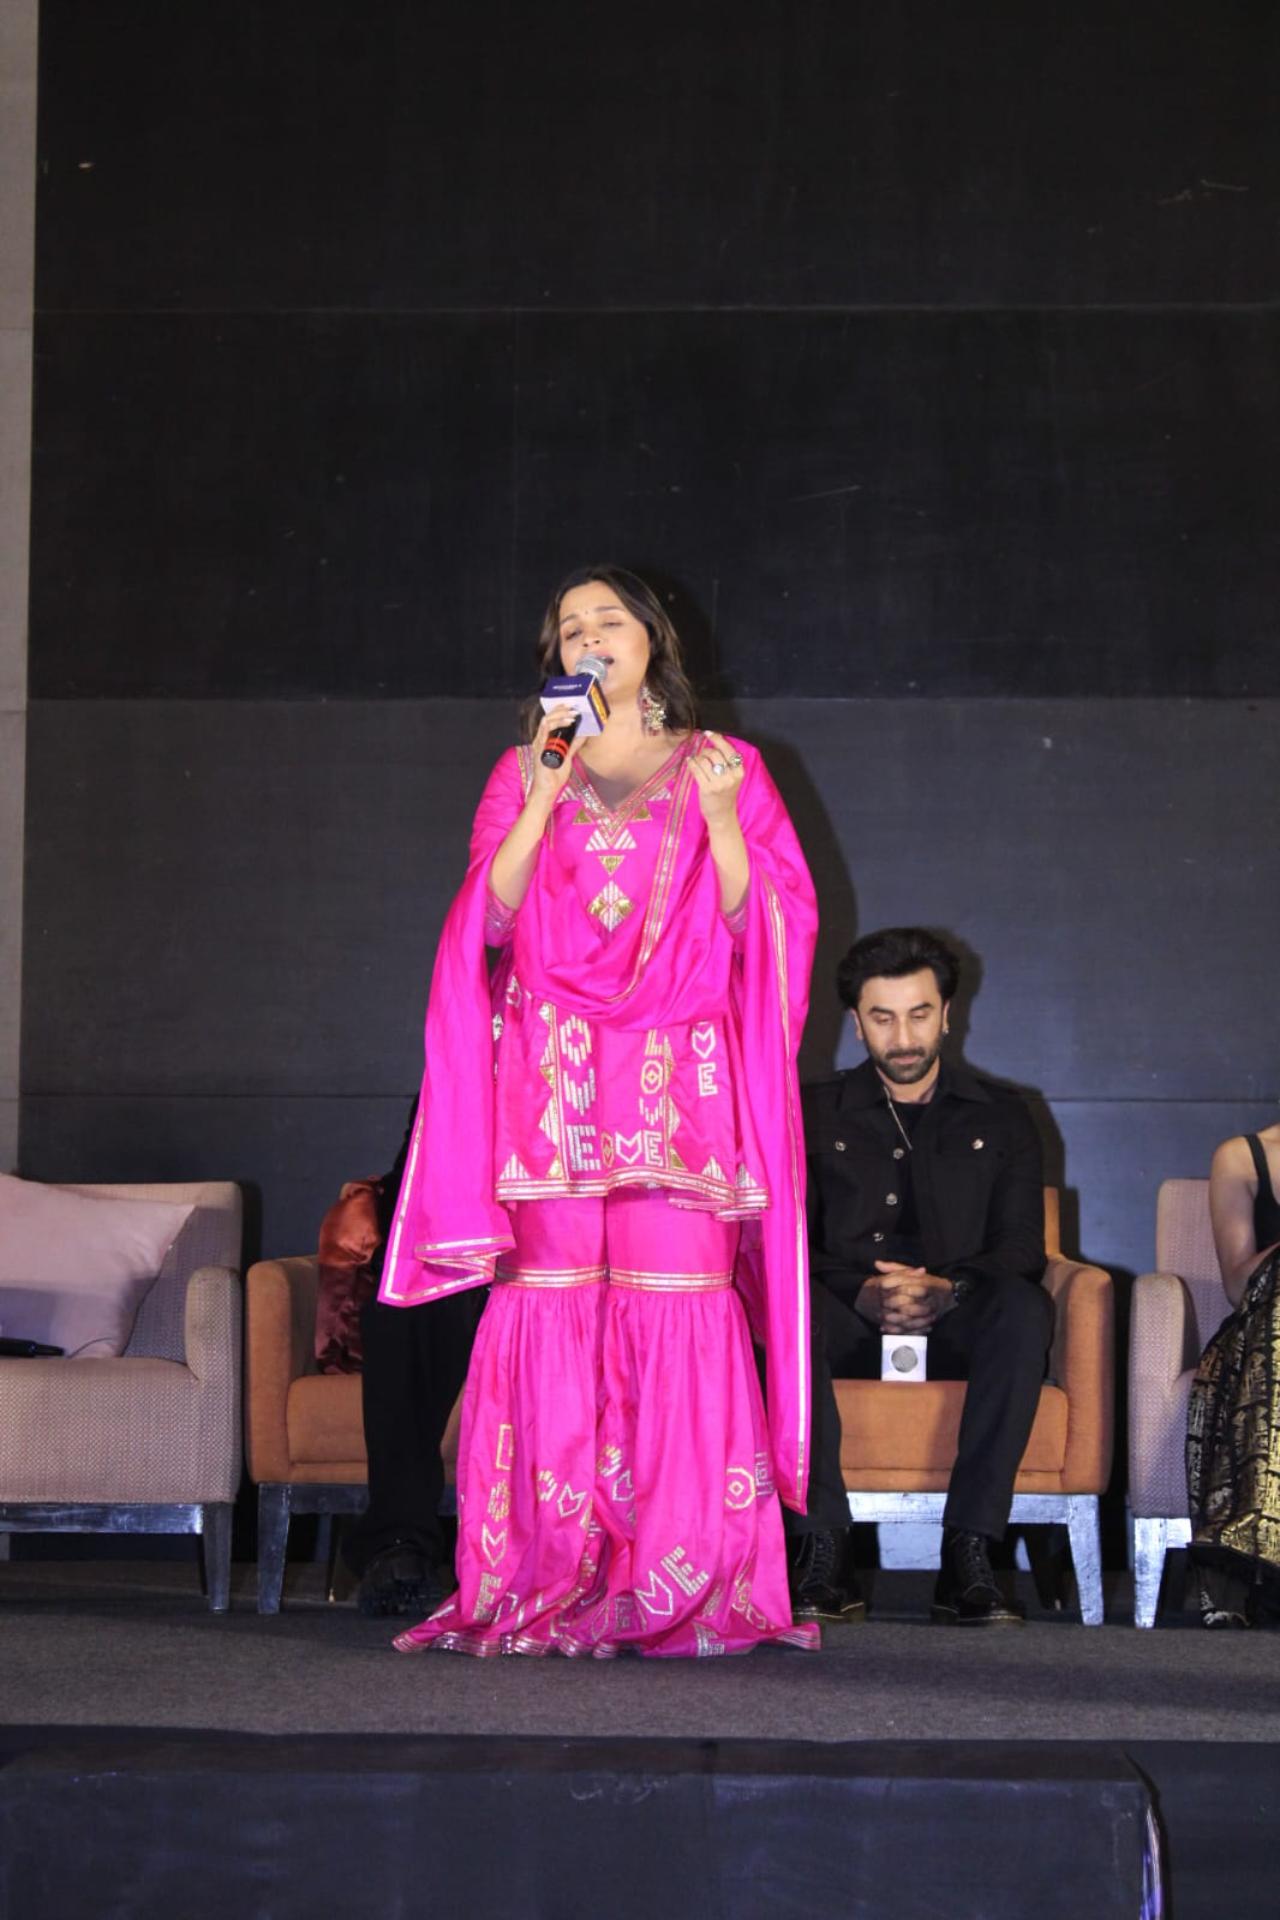 At the event which was also graced by SS Rajamouli and Jr NTR, Alia sang the Telugu version of 'Kesariya' from the film. Ranbir also gave a message in Telugu to the people present at the event